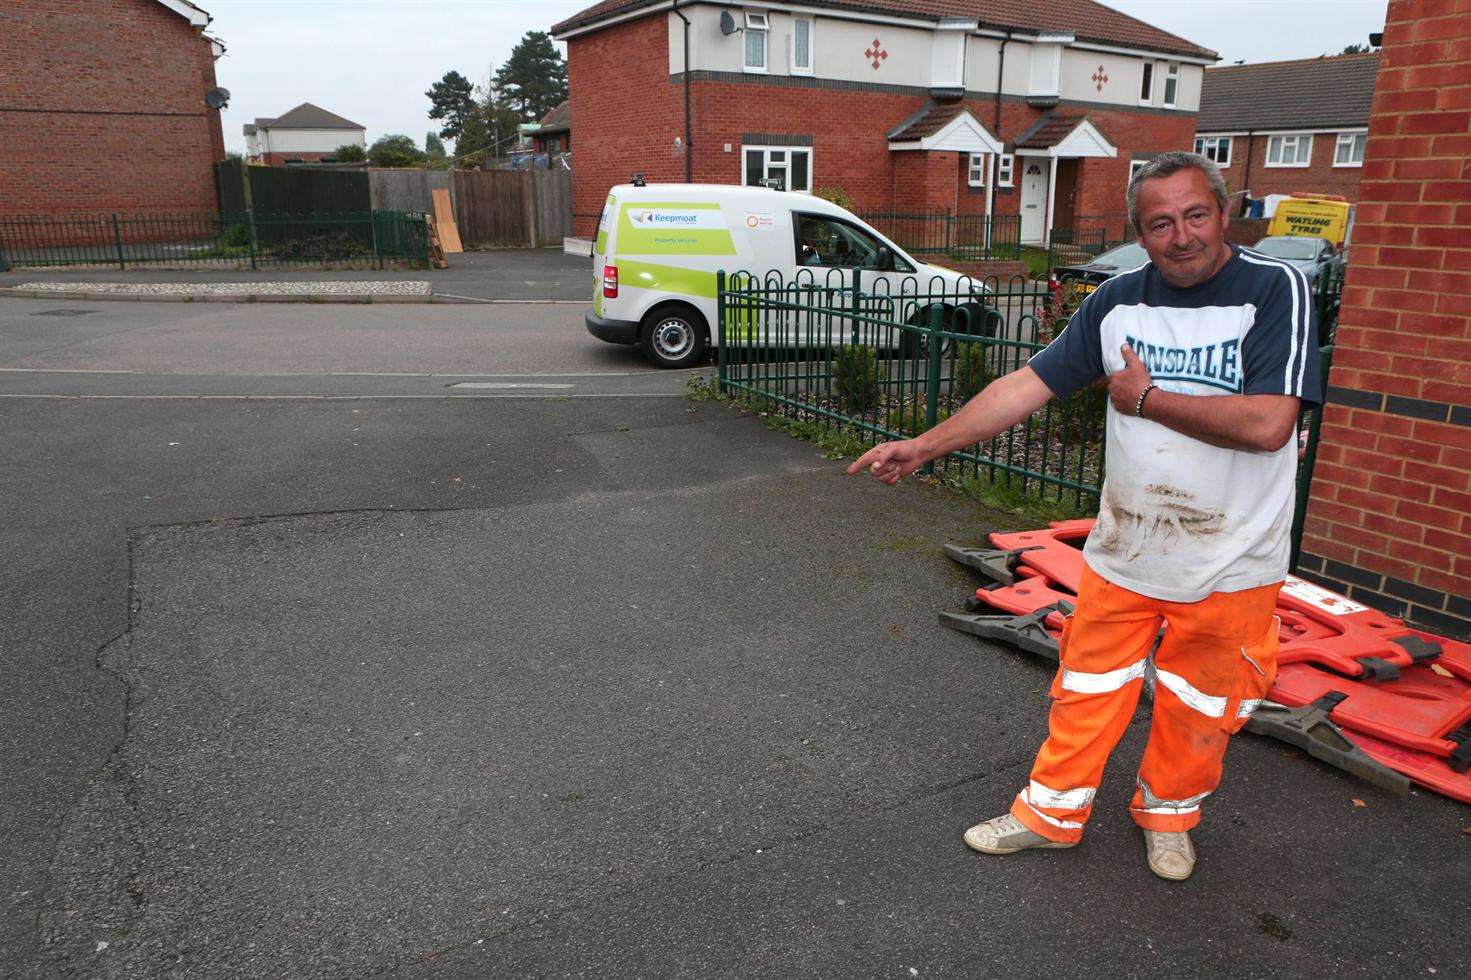 Lee Thwaite is a resident affected by the sinkhole in Springwood Road, Barming